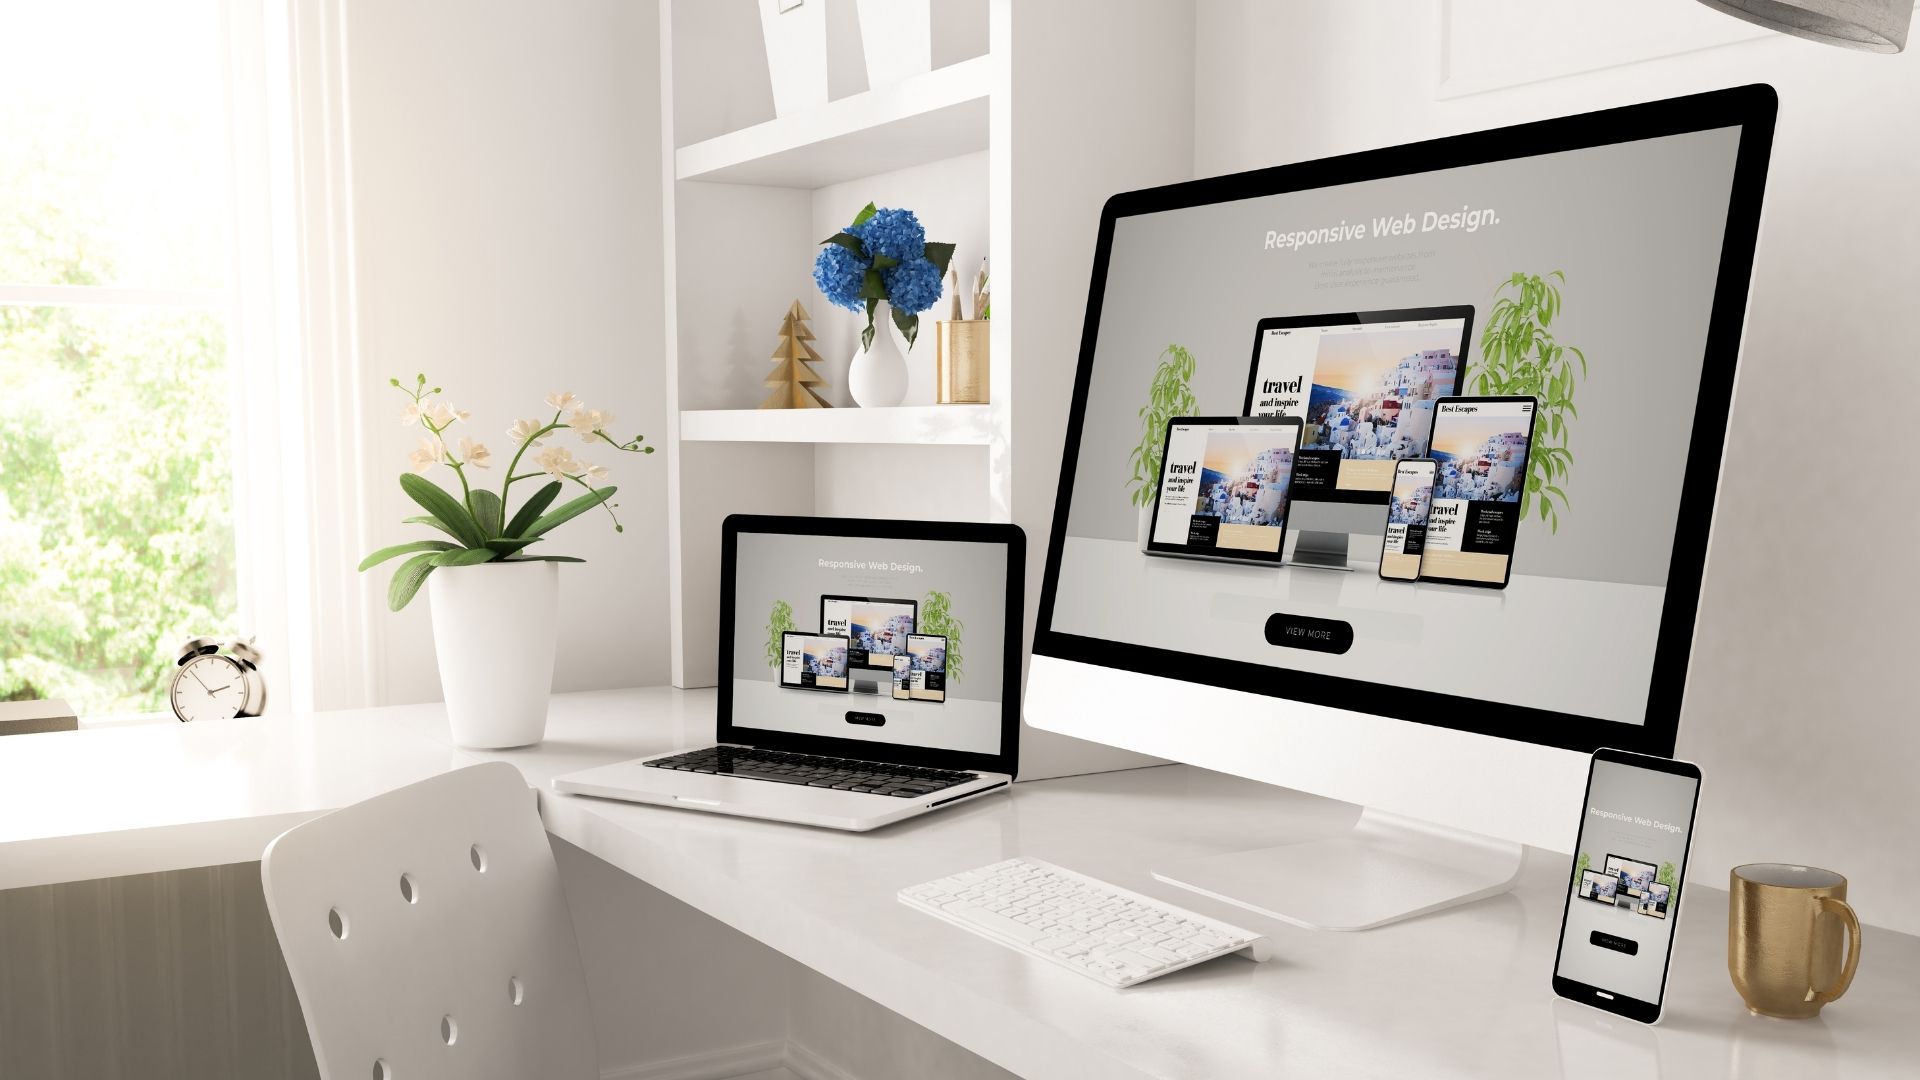 Keeping your website responsive during redesign